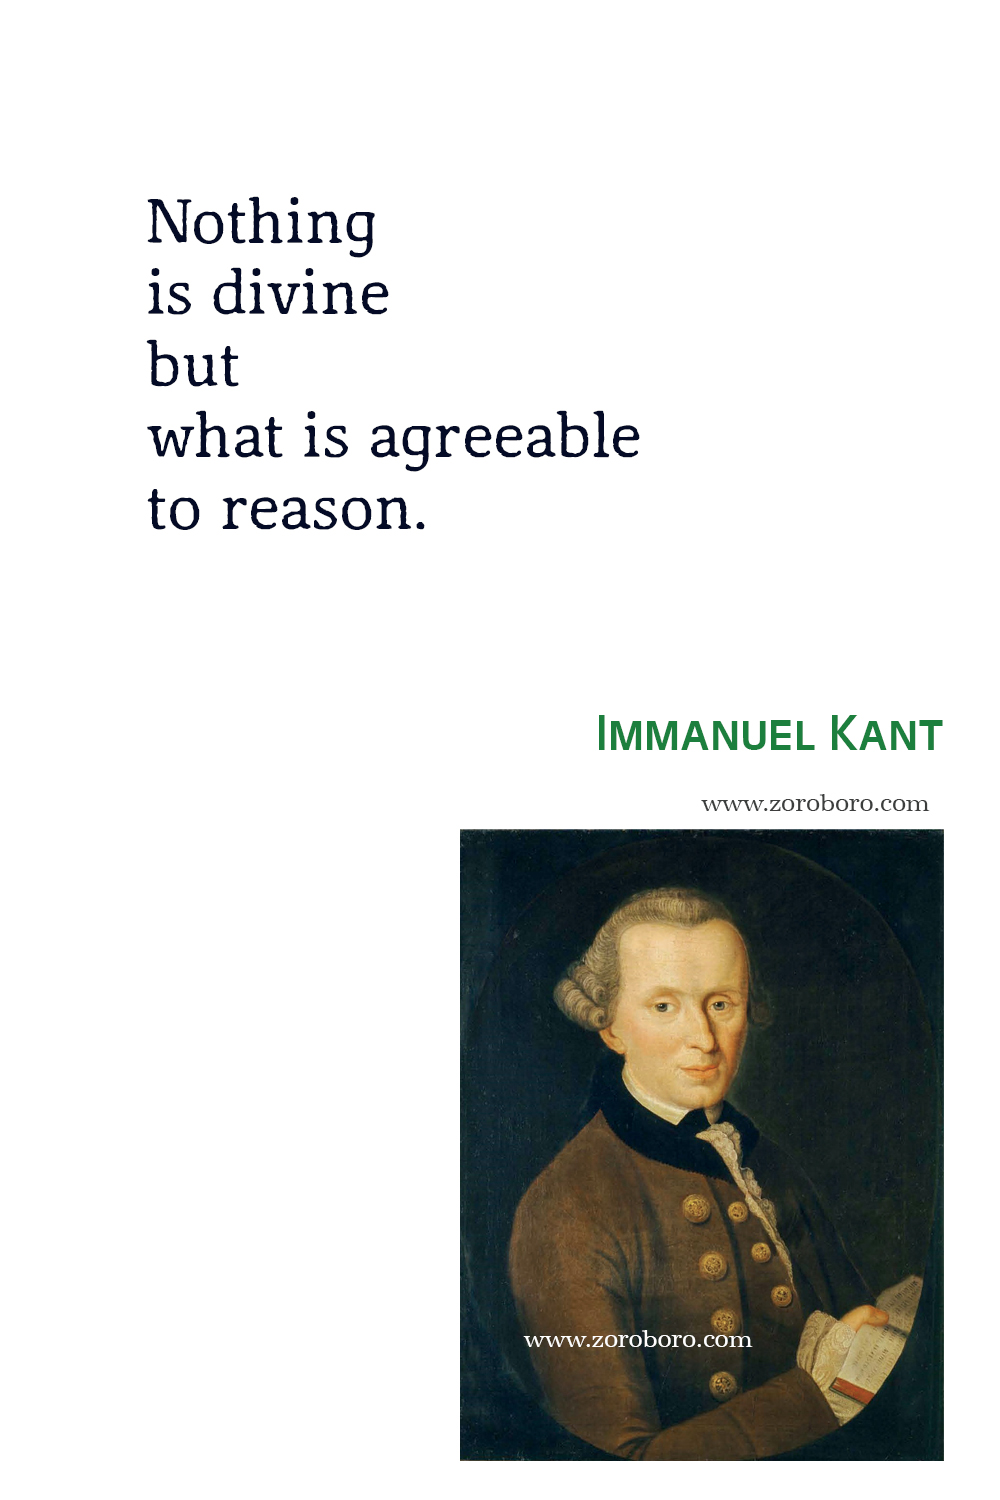 Immanuel Kant Quotes. Immanuel Kant Philosophy, Immanuel Kant Books, Kantian Ethics & Education. Immanuel Kant Quotes.